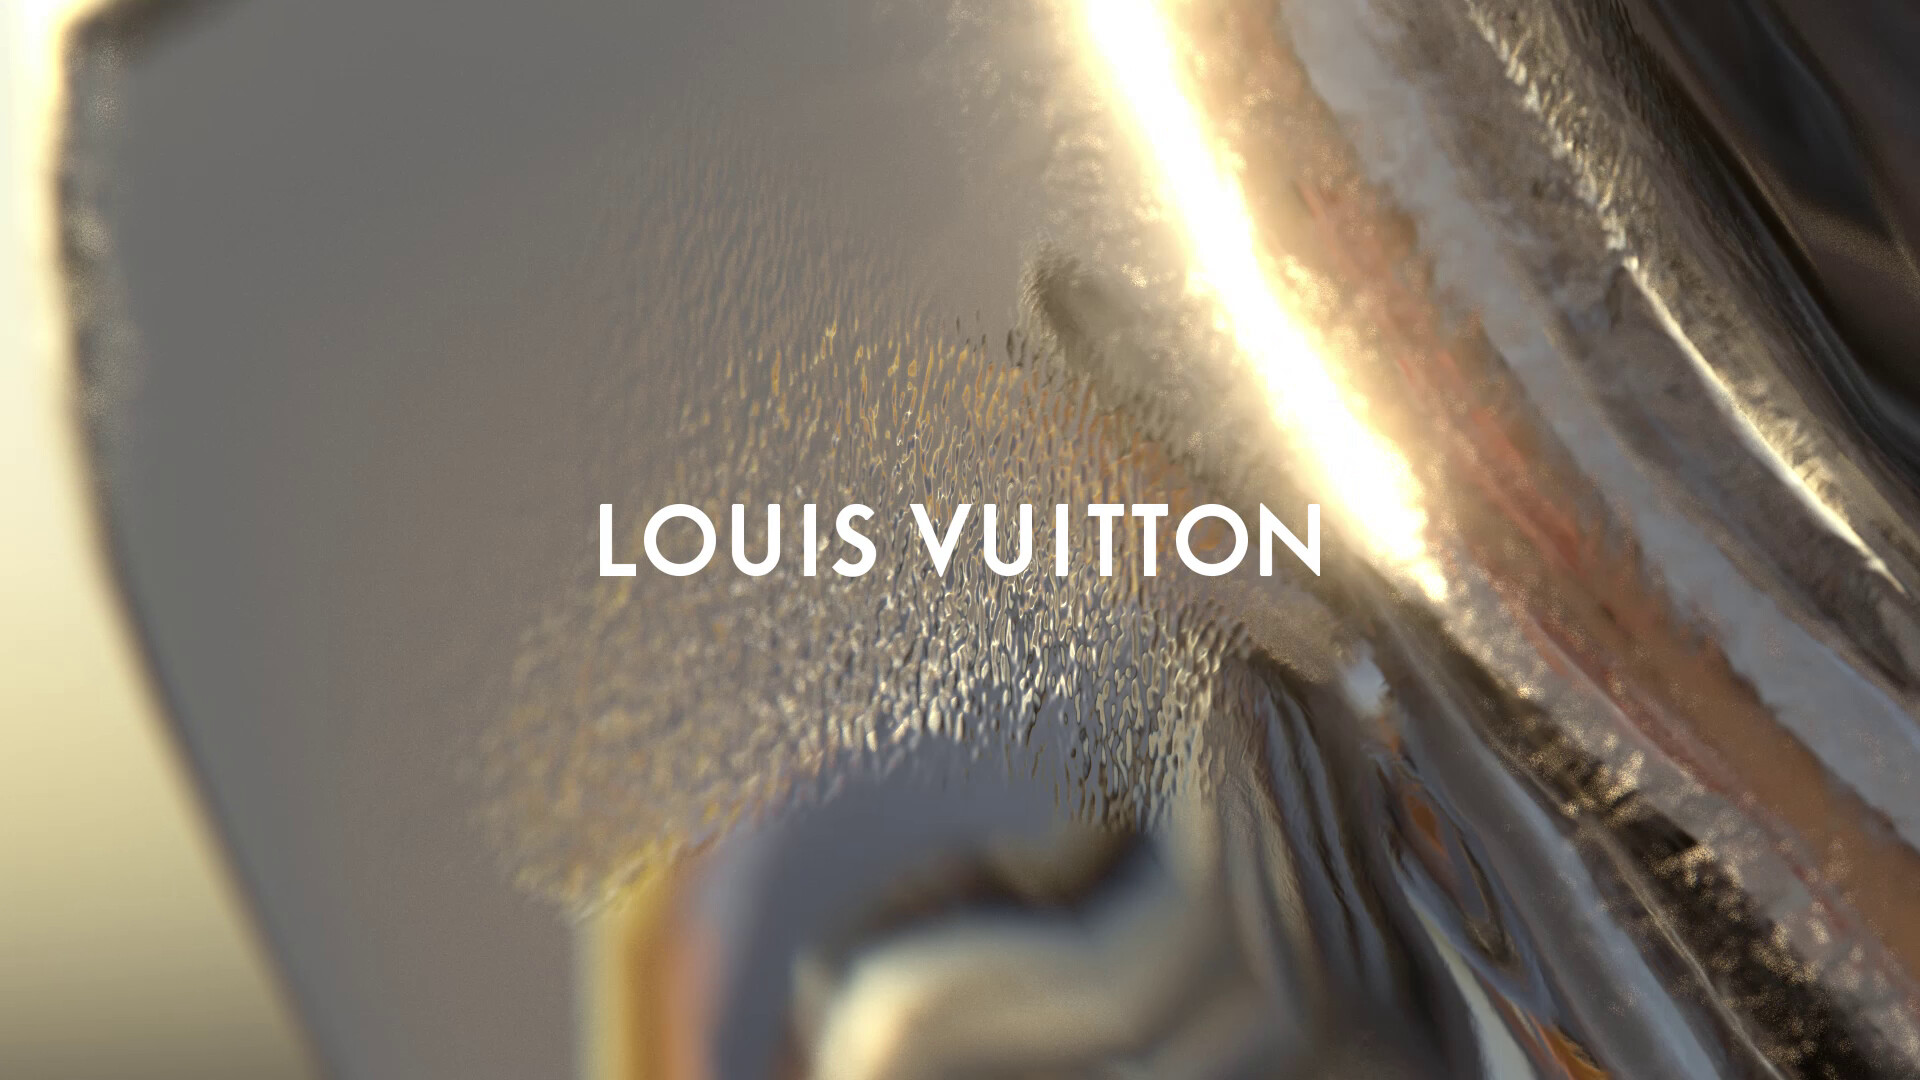 Louis Vuitton Les Extraits Collection Brand Films by Already Been Chewed  - Motion design - STASH : Motion design – STASH